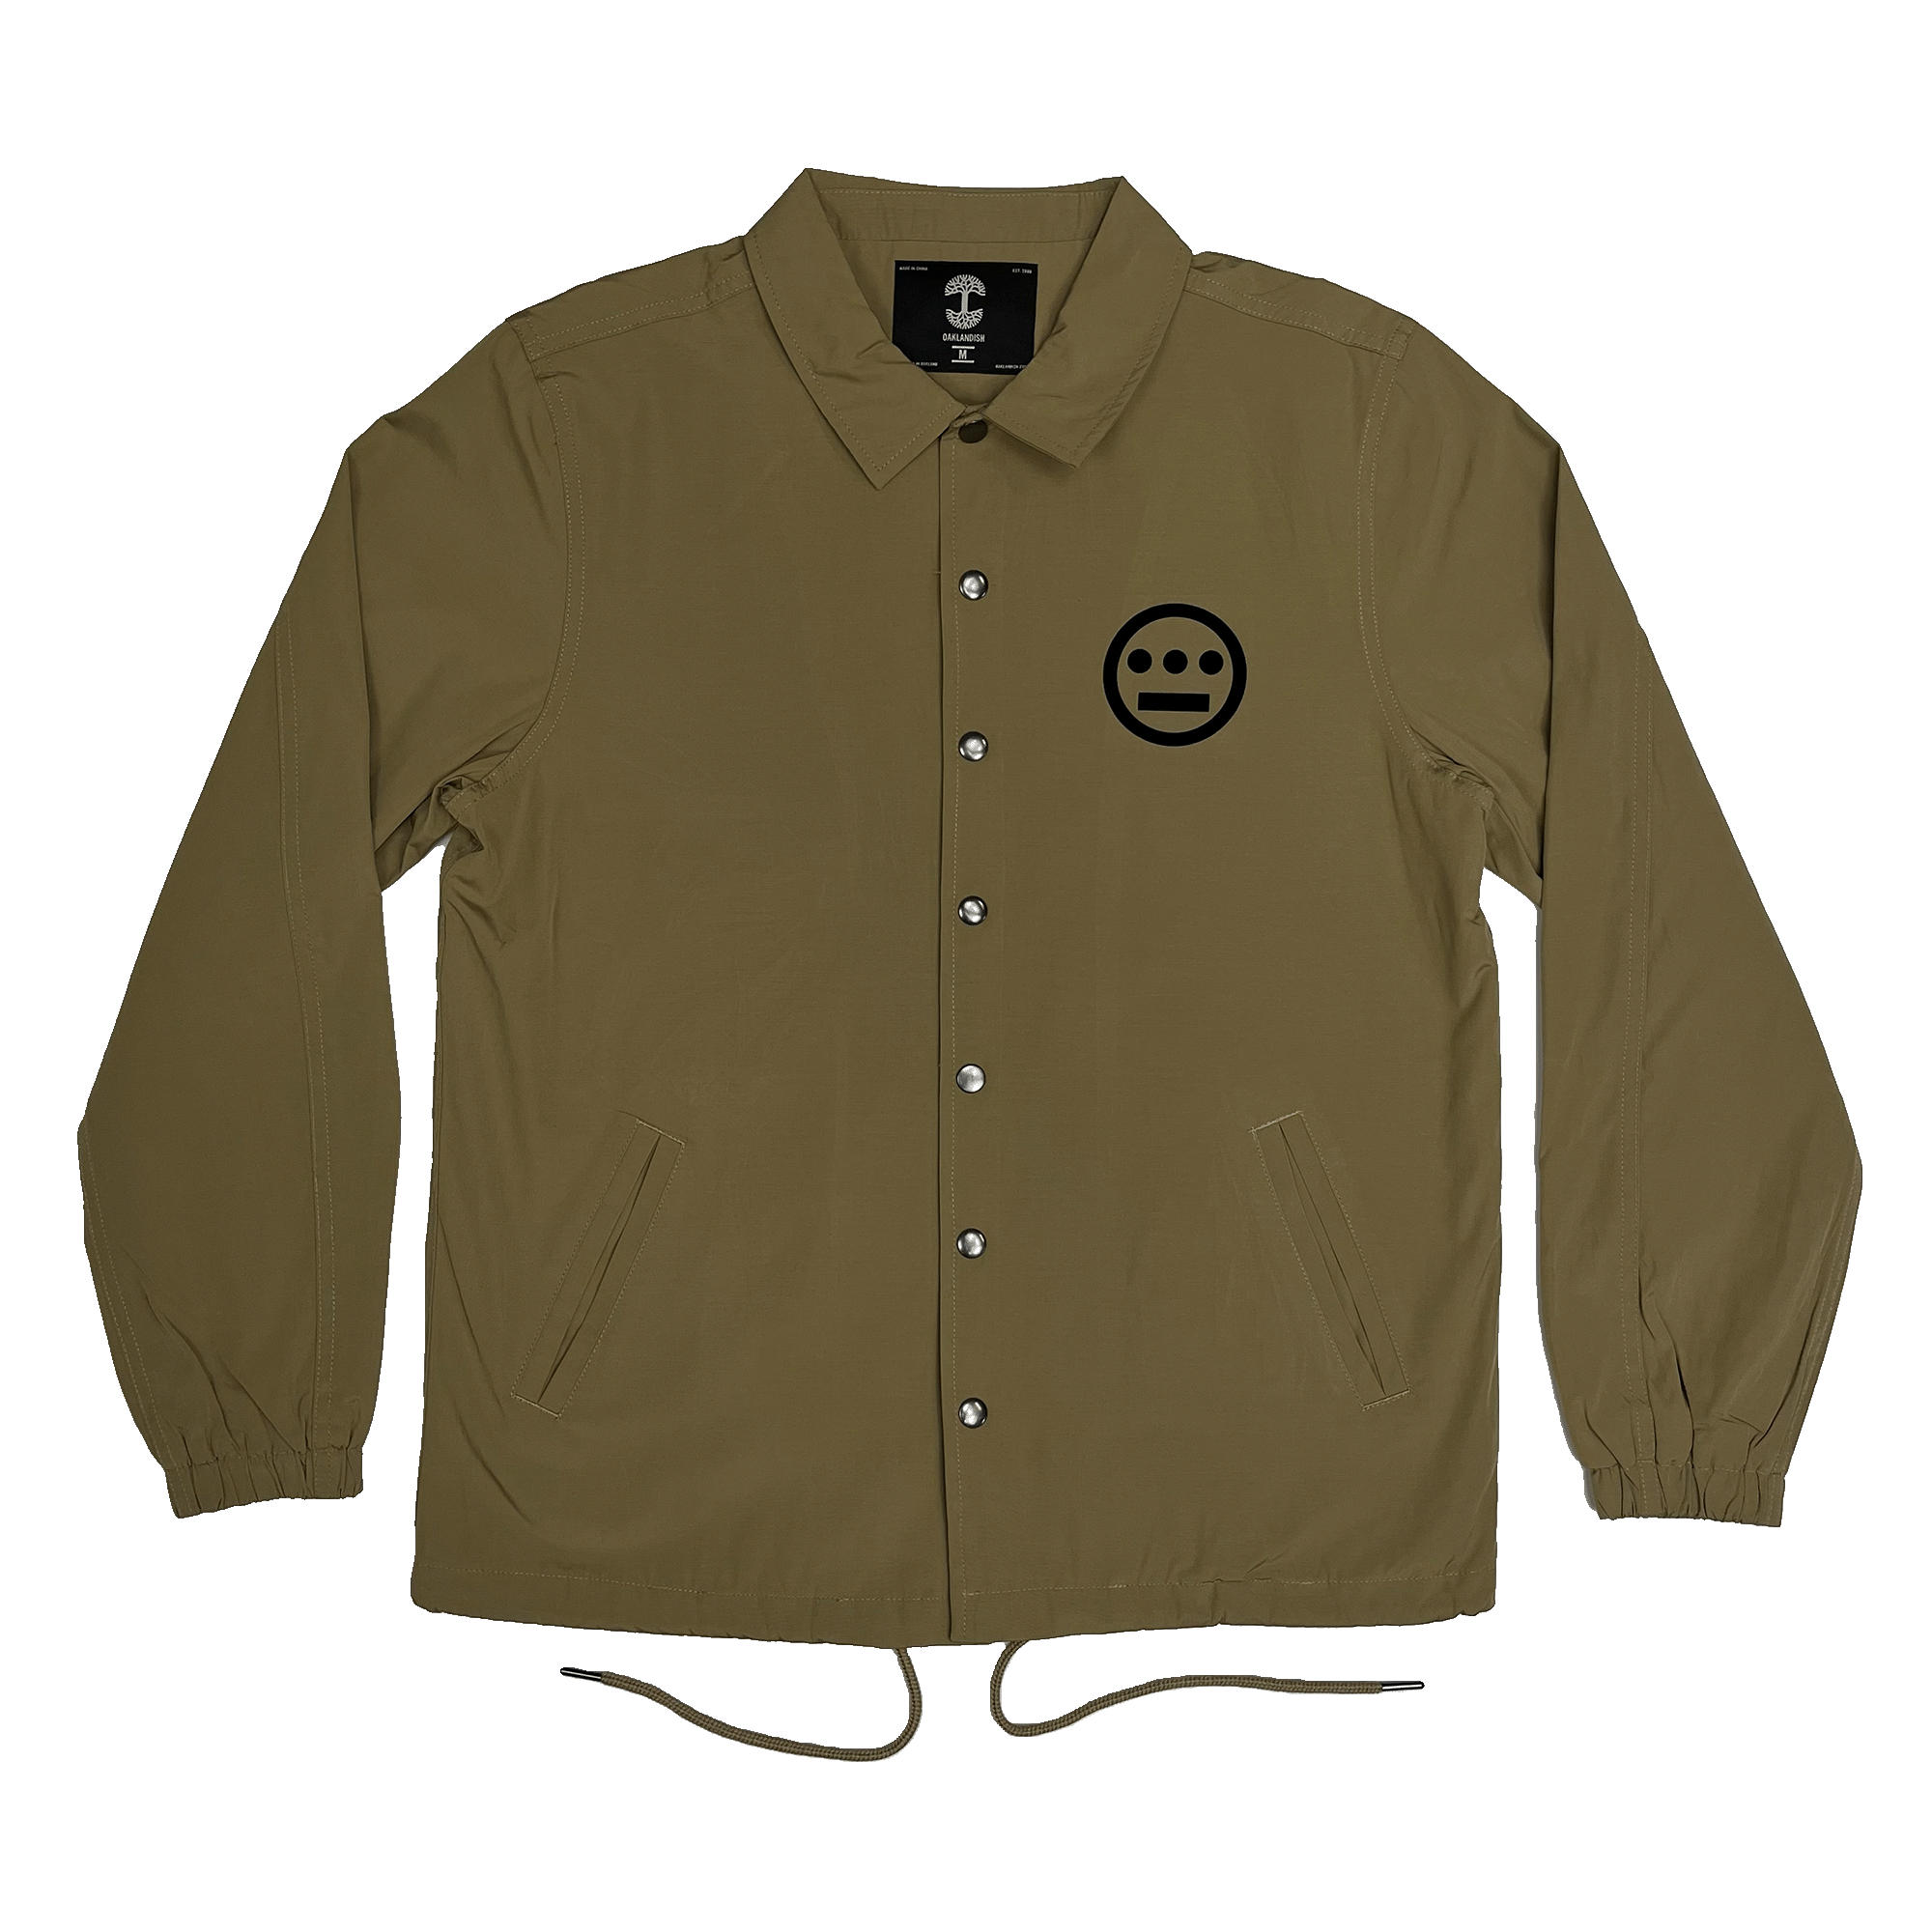 Khaki coaches jacket with snap closure, collar, and drawstring waist and Hiero logo printed in black ink on front left chest.